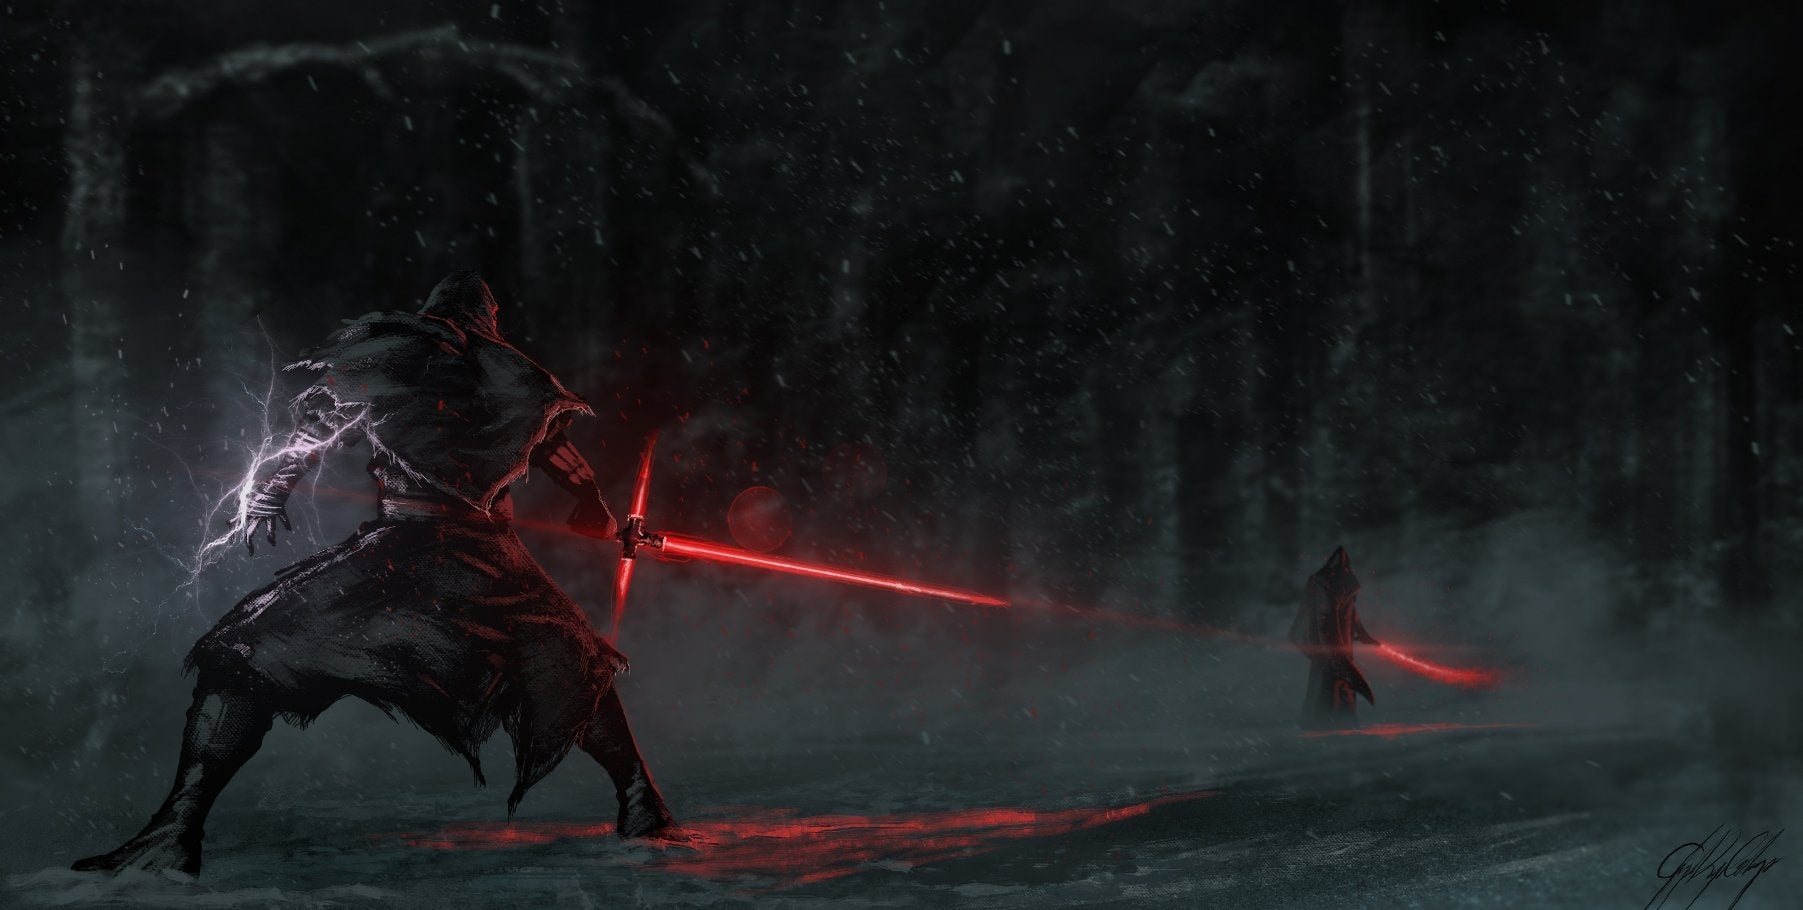 There's Already Amazing Star Wars: Episode VII Fan Art